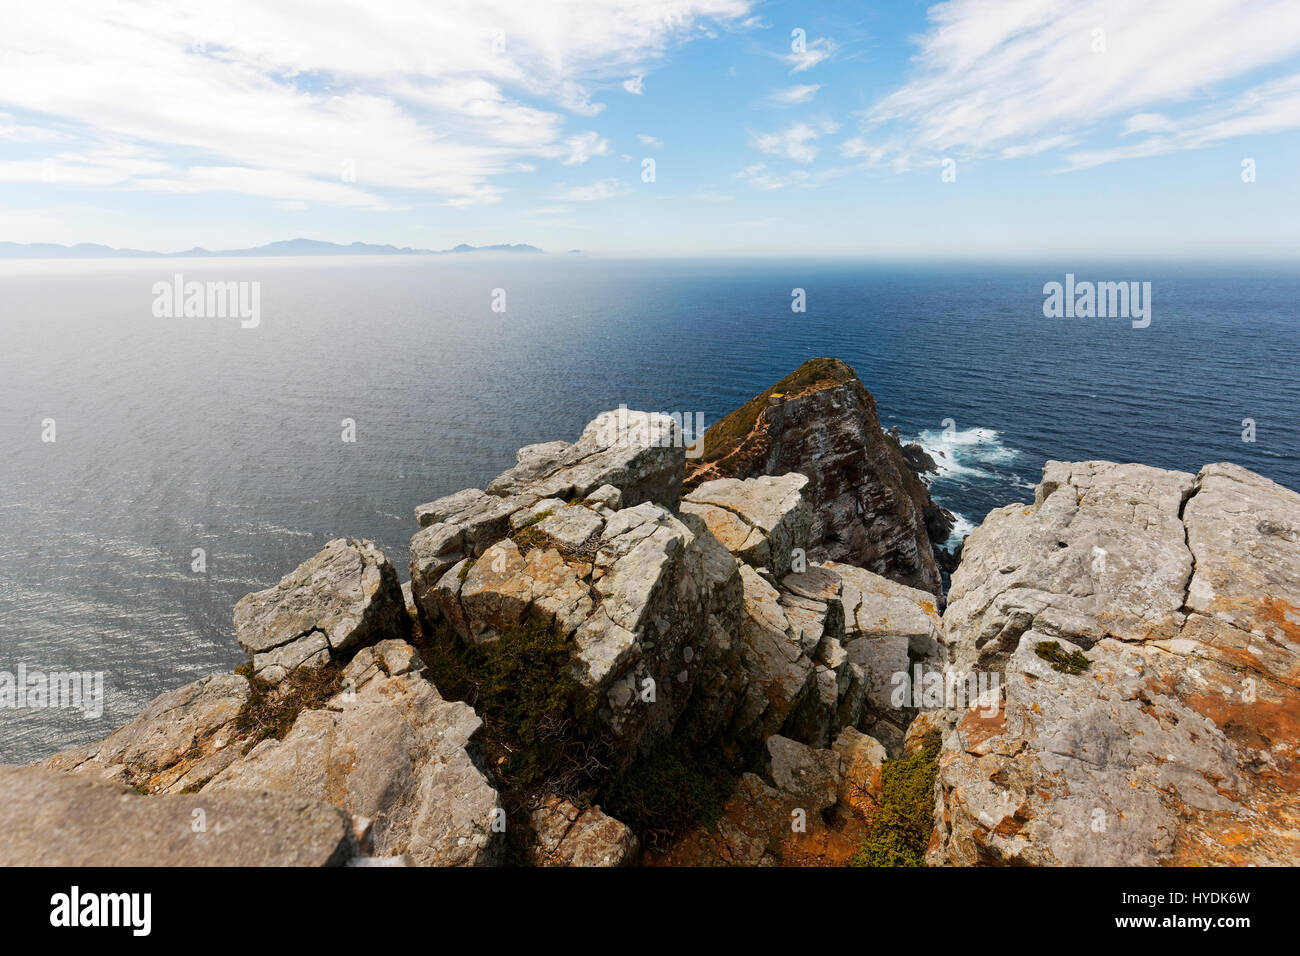 Cape Point Table Mountain National Park, Western Cape, Sud Africa Foto Stock